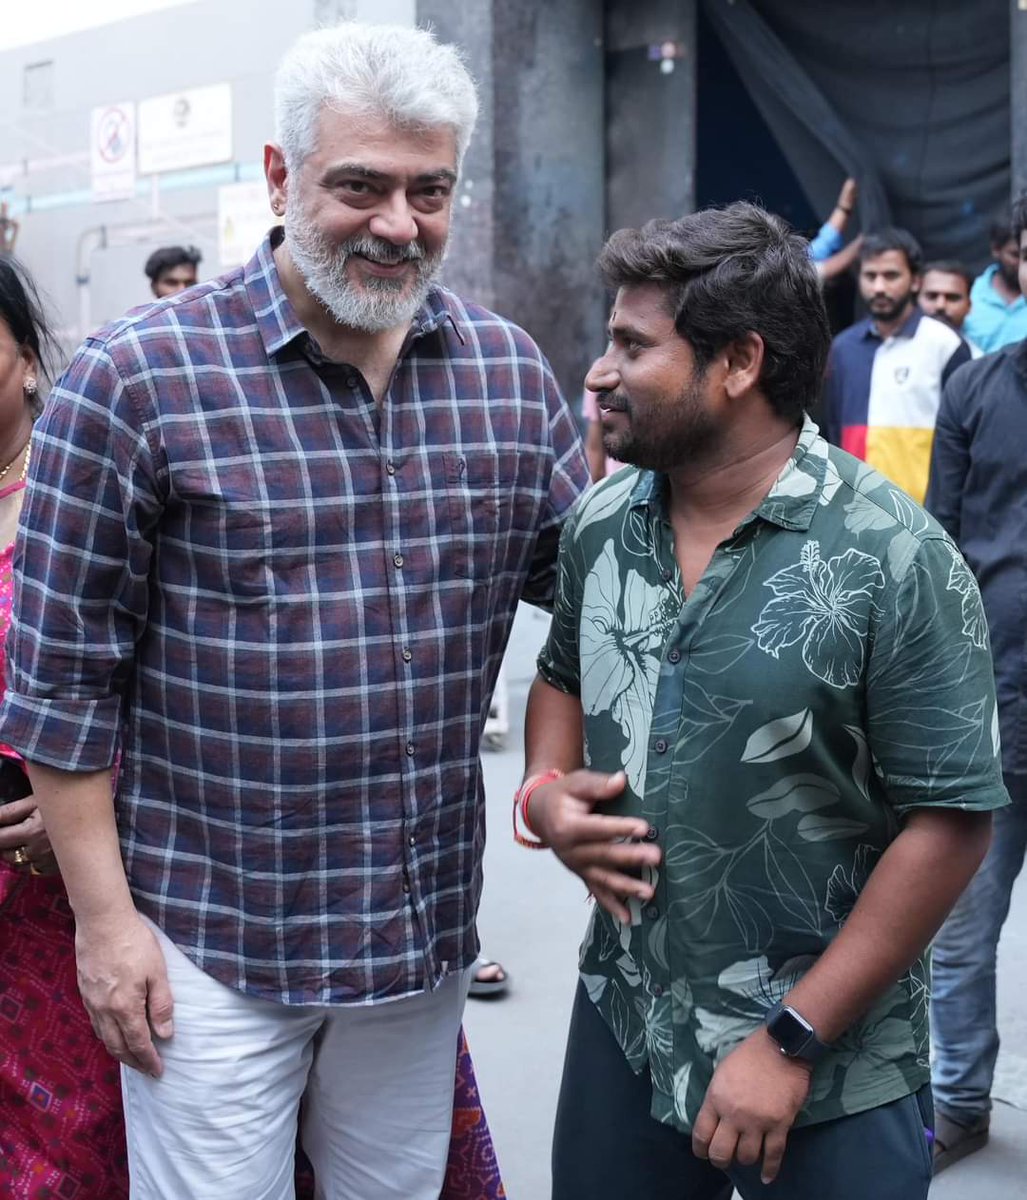 THALA #AjithKumar Sir LATEST Picture From #GoodBadUgly Set 🔥😎 Shooting Is Ongoing And The Movie Will Be Released On Pongal 2025. #VidaaMuyarchi For Coming Diwali 😉